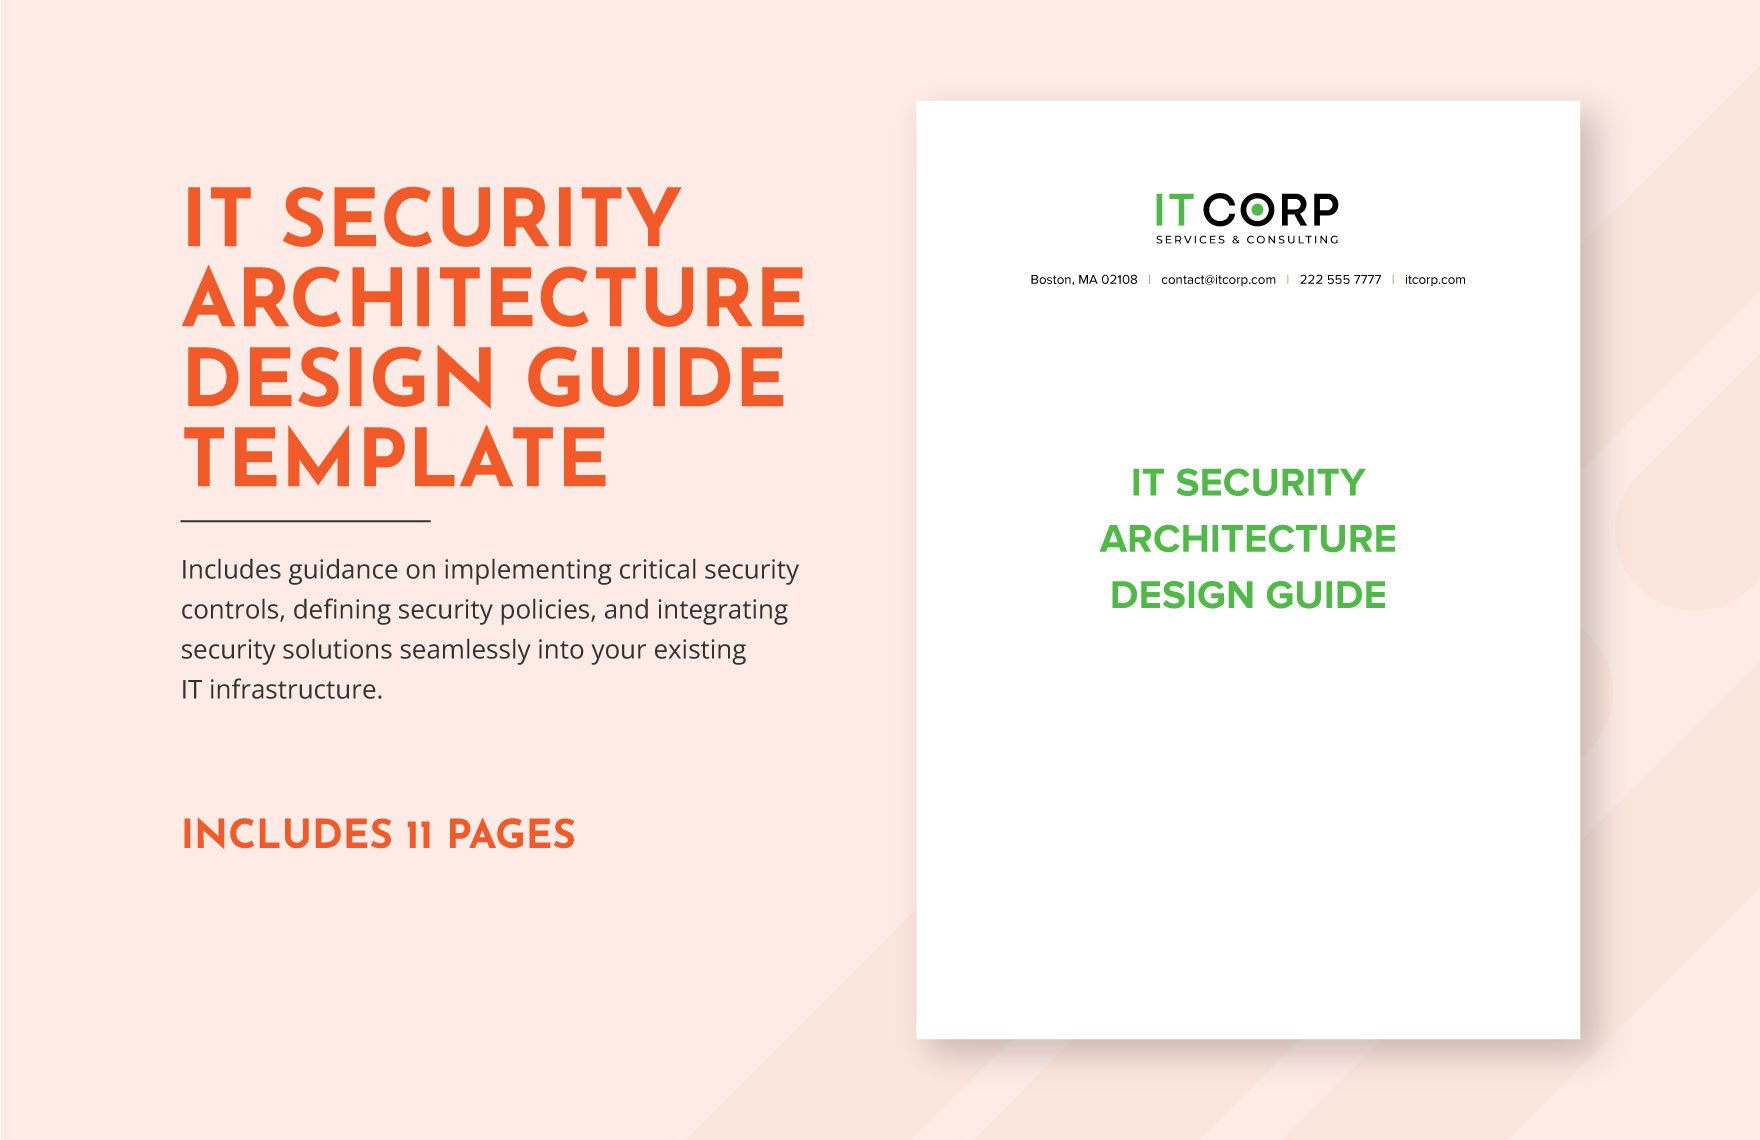 IT Security Architecture Design Guide Template in Word, Google Docs, PDF